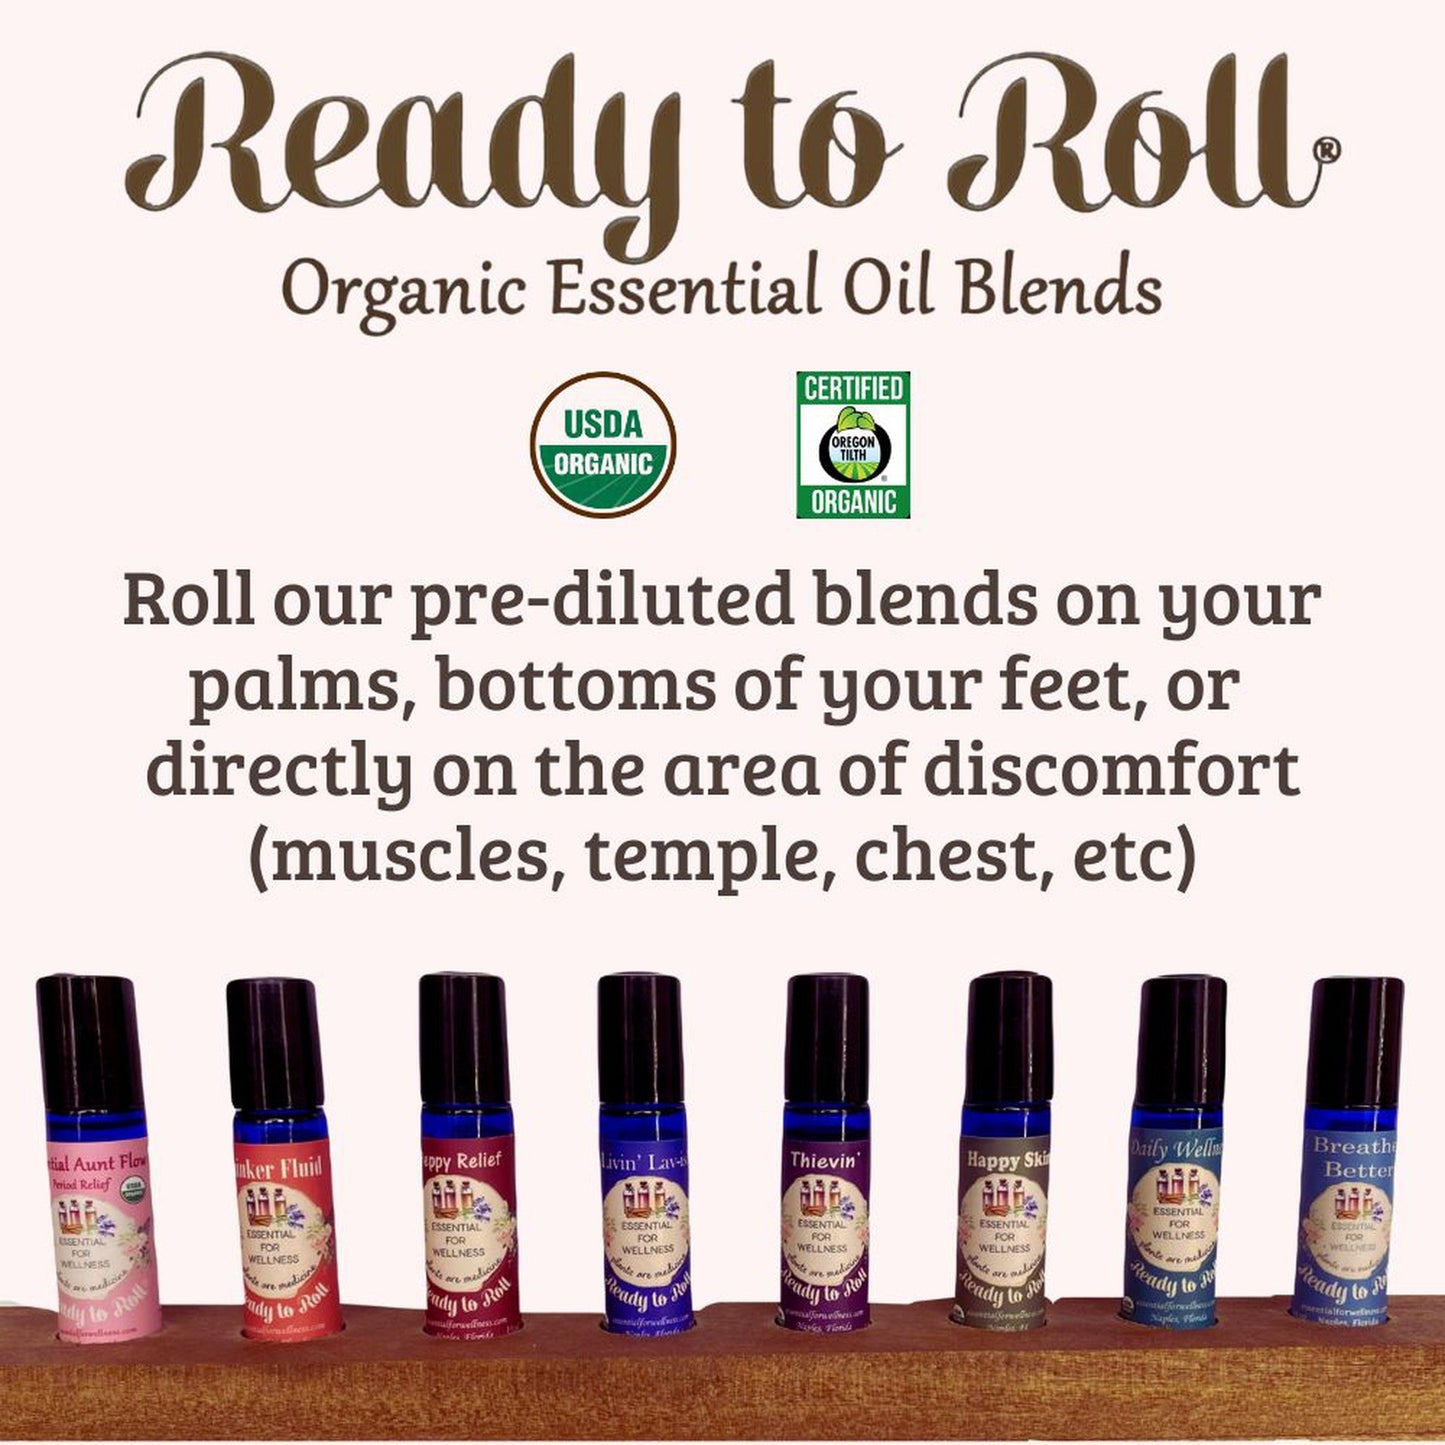 Ready to Roll® Breathe Better Organic Essential Oil Blends